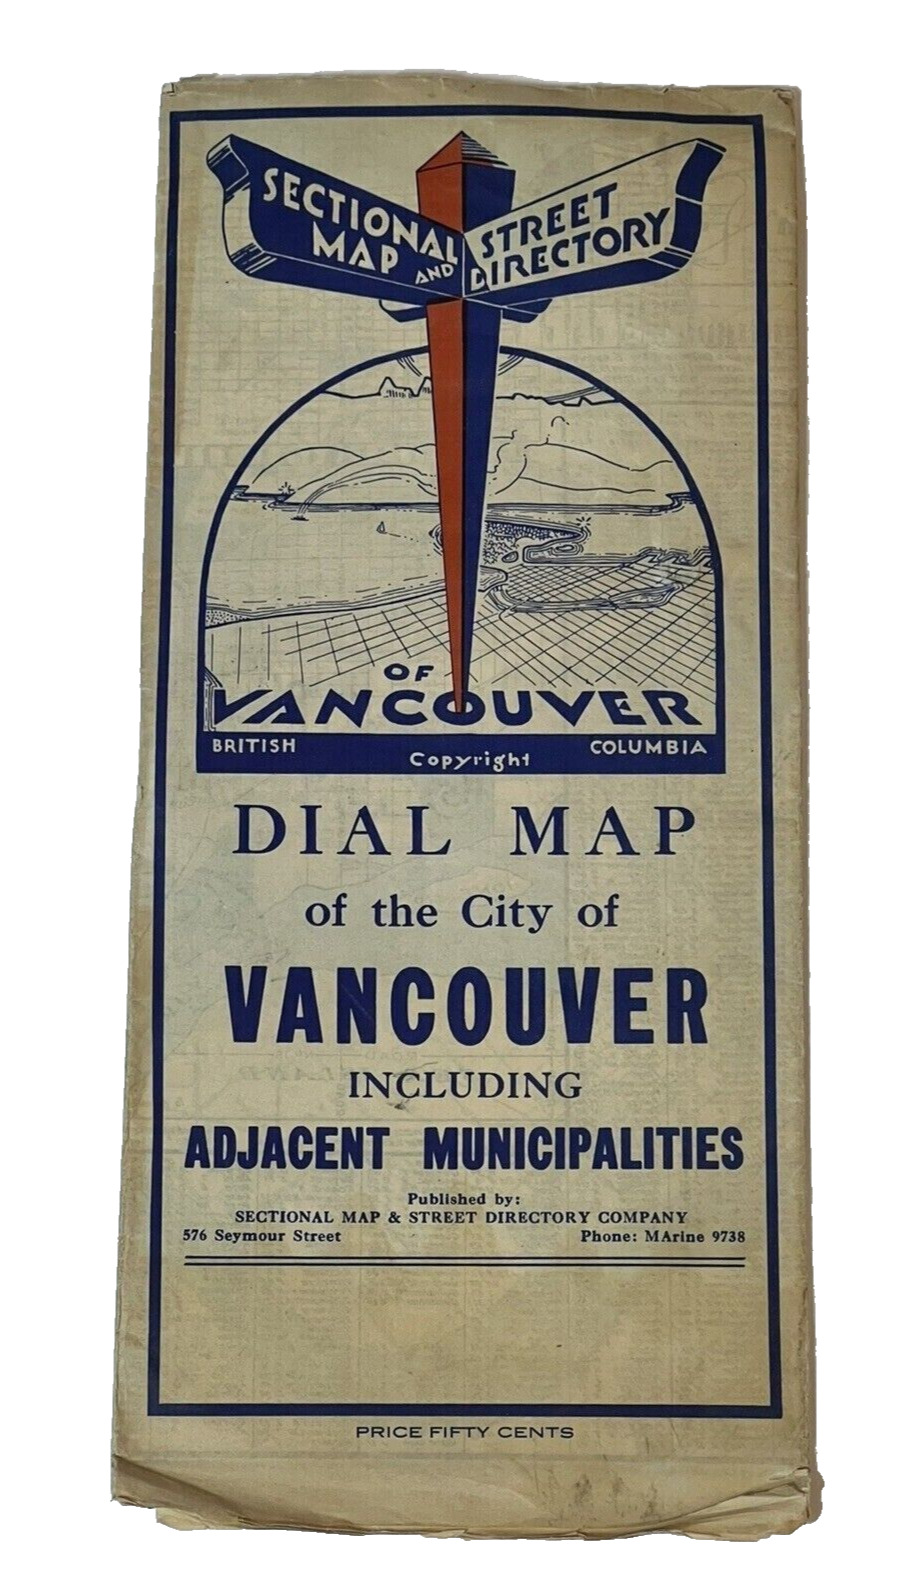 Vtg 1960's Vancouver British Columbia Street MAP Directory Working Dial Fold Out